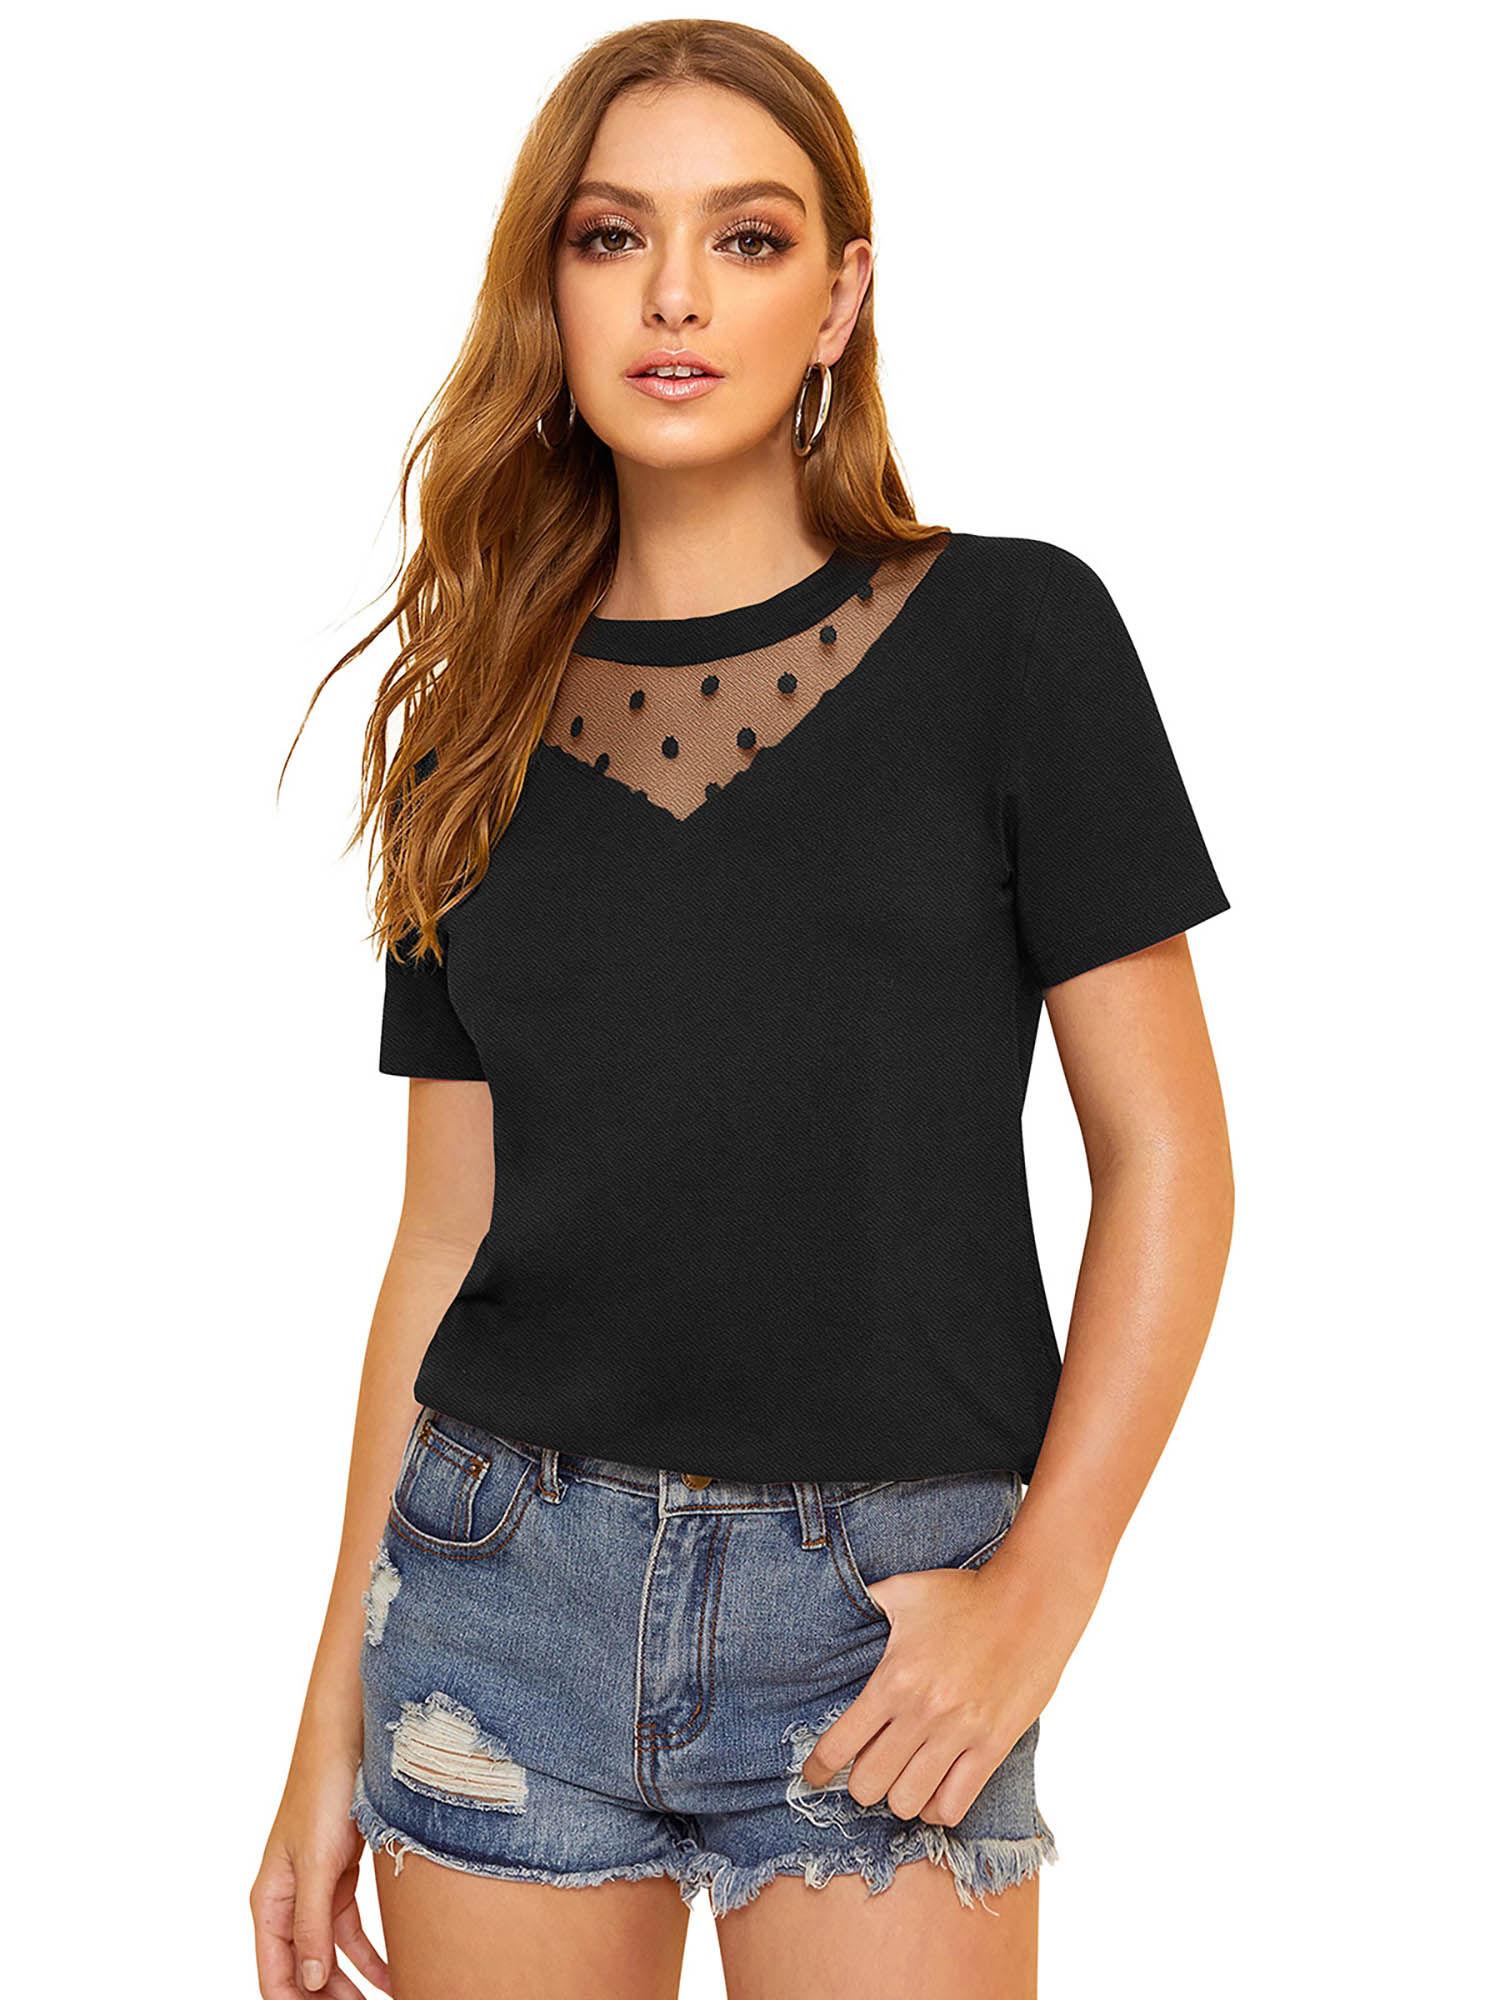 black knit fabric top for women